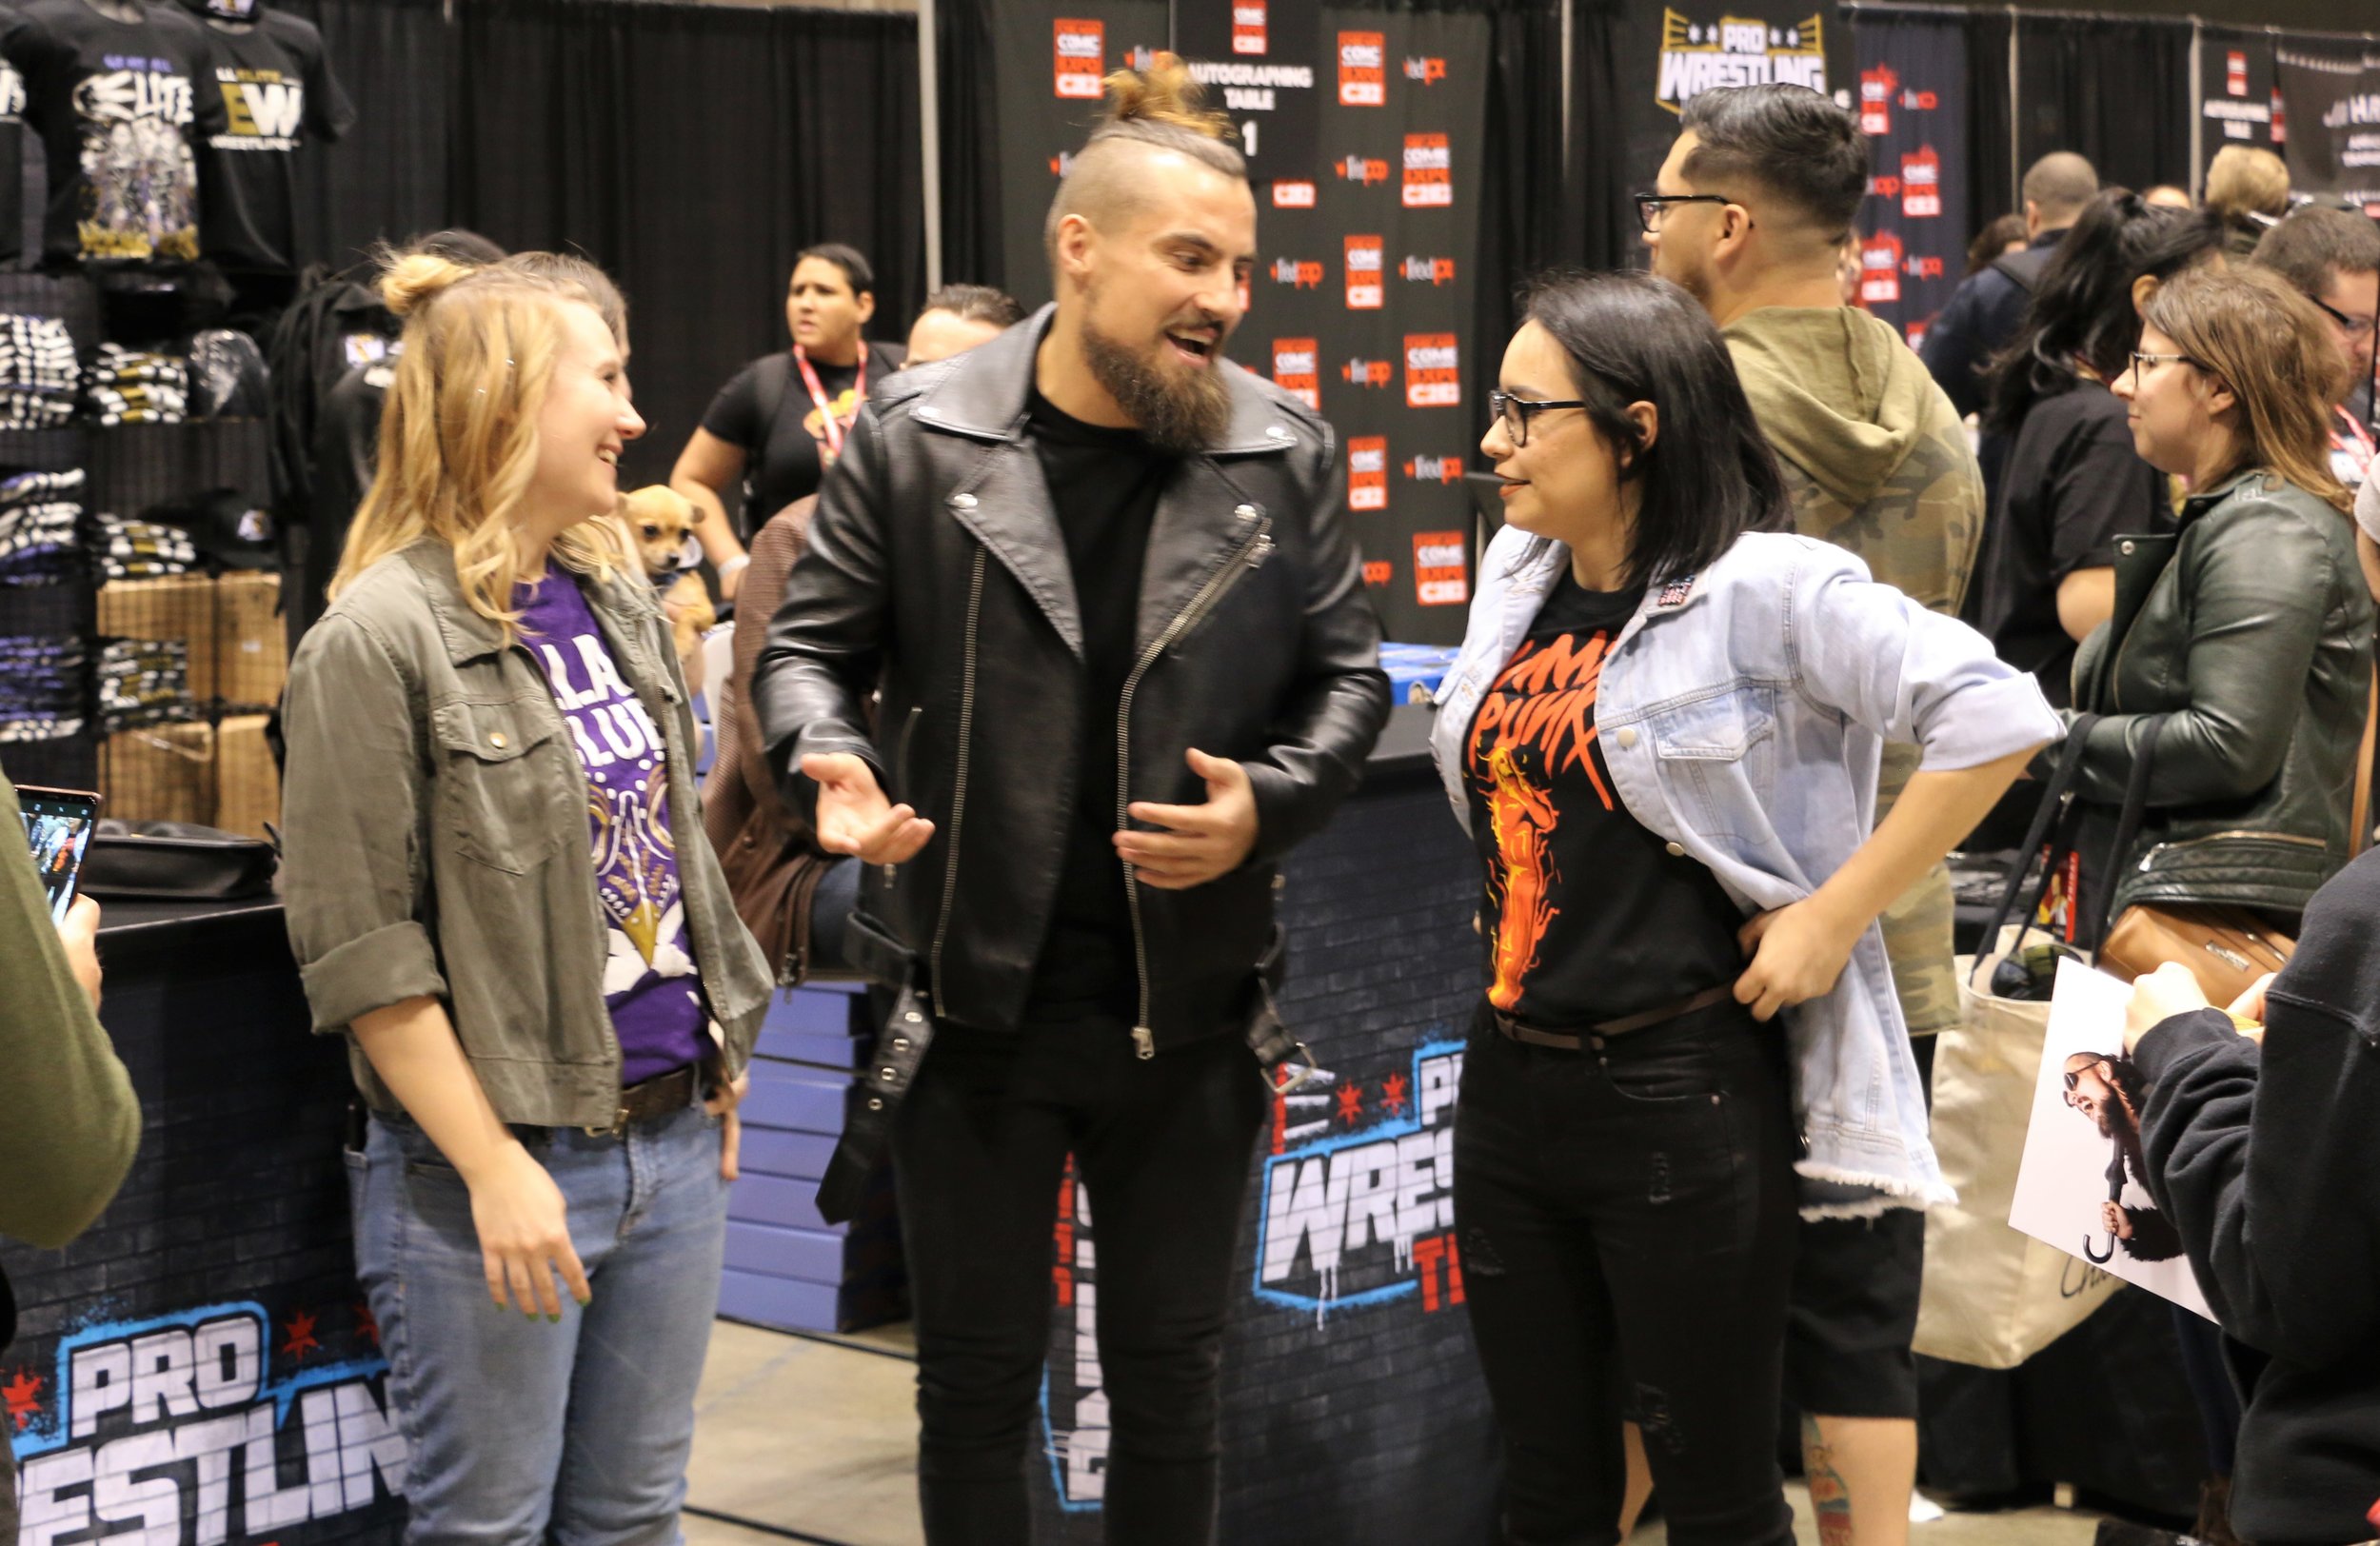  ROH star Marty Scurll, center, talks with fans at Pro Wrestling Tees booth. 